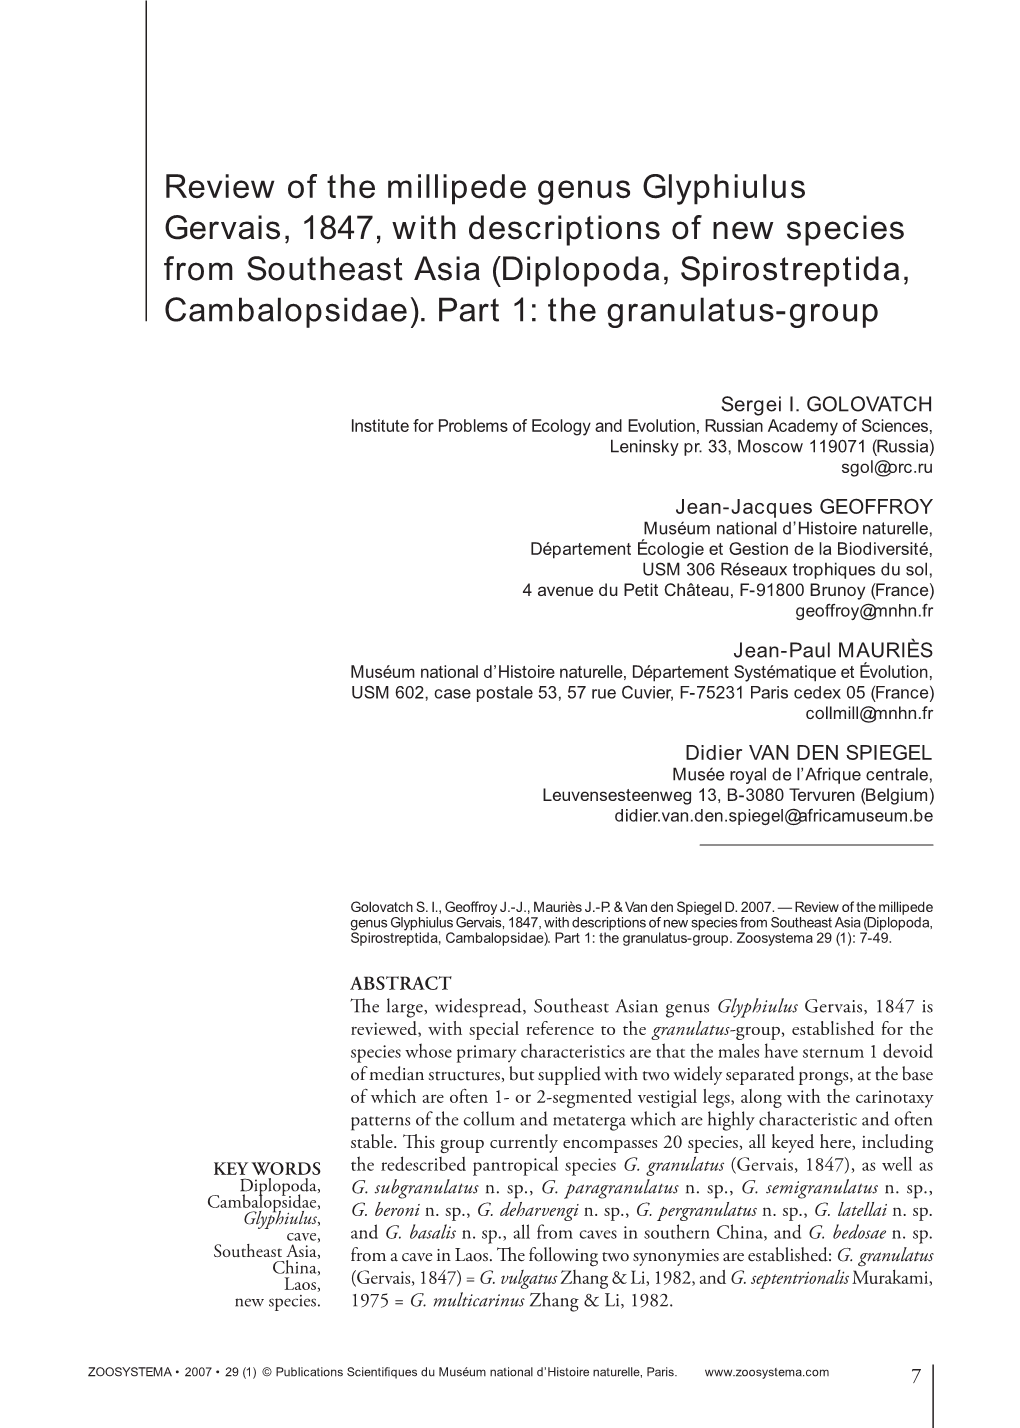 Review of the Millipede Genus Glyphiulus Gervais, 1847, with Descriptions of New Species from Southeast Asia (Diplopoda, Spirostreptida, Cambalopsidae)